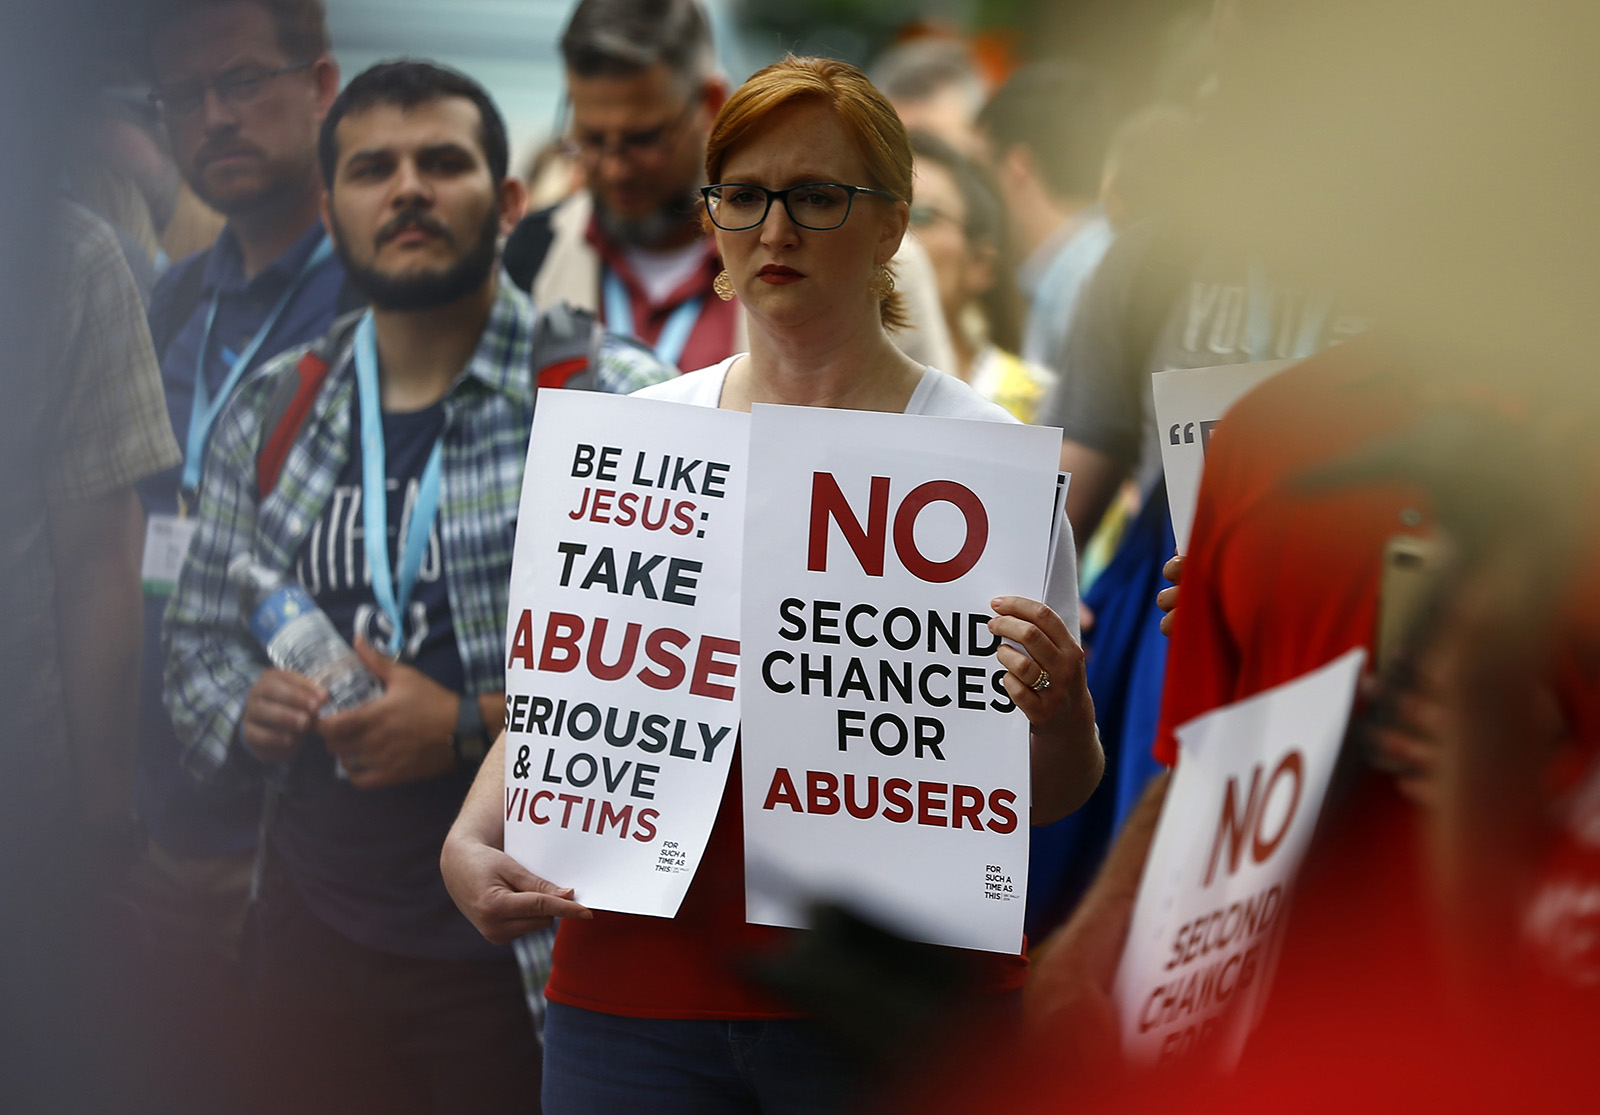 A woman holds signs about abuse during a rally outside the annual meeting of the Southern Baptist Convention at the Birmingham-Jefferson Convention Complex on June 11, 2019, in Birmingham, Ala. RNS photo by Butch Dill